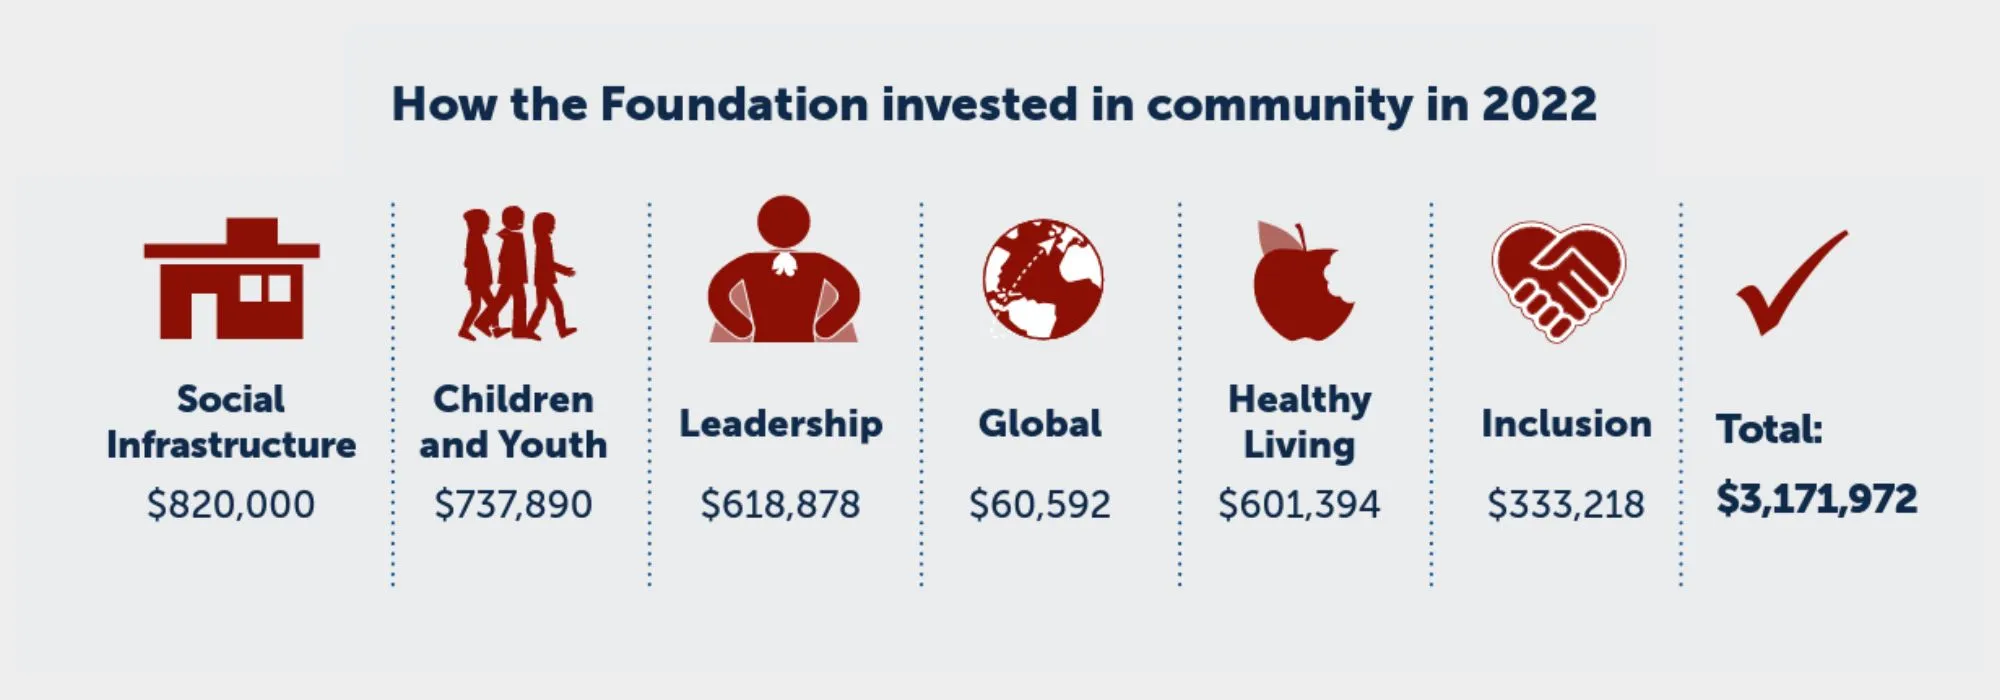 How the Foundation Invests in Community: Social Infrastructure - $820,000; Children and Youth - $737,890; Leadership - $618,878; Global - $60,592; Healthy Living - $601,394; Inclusion - $333,218; Total - $3,171,972